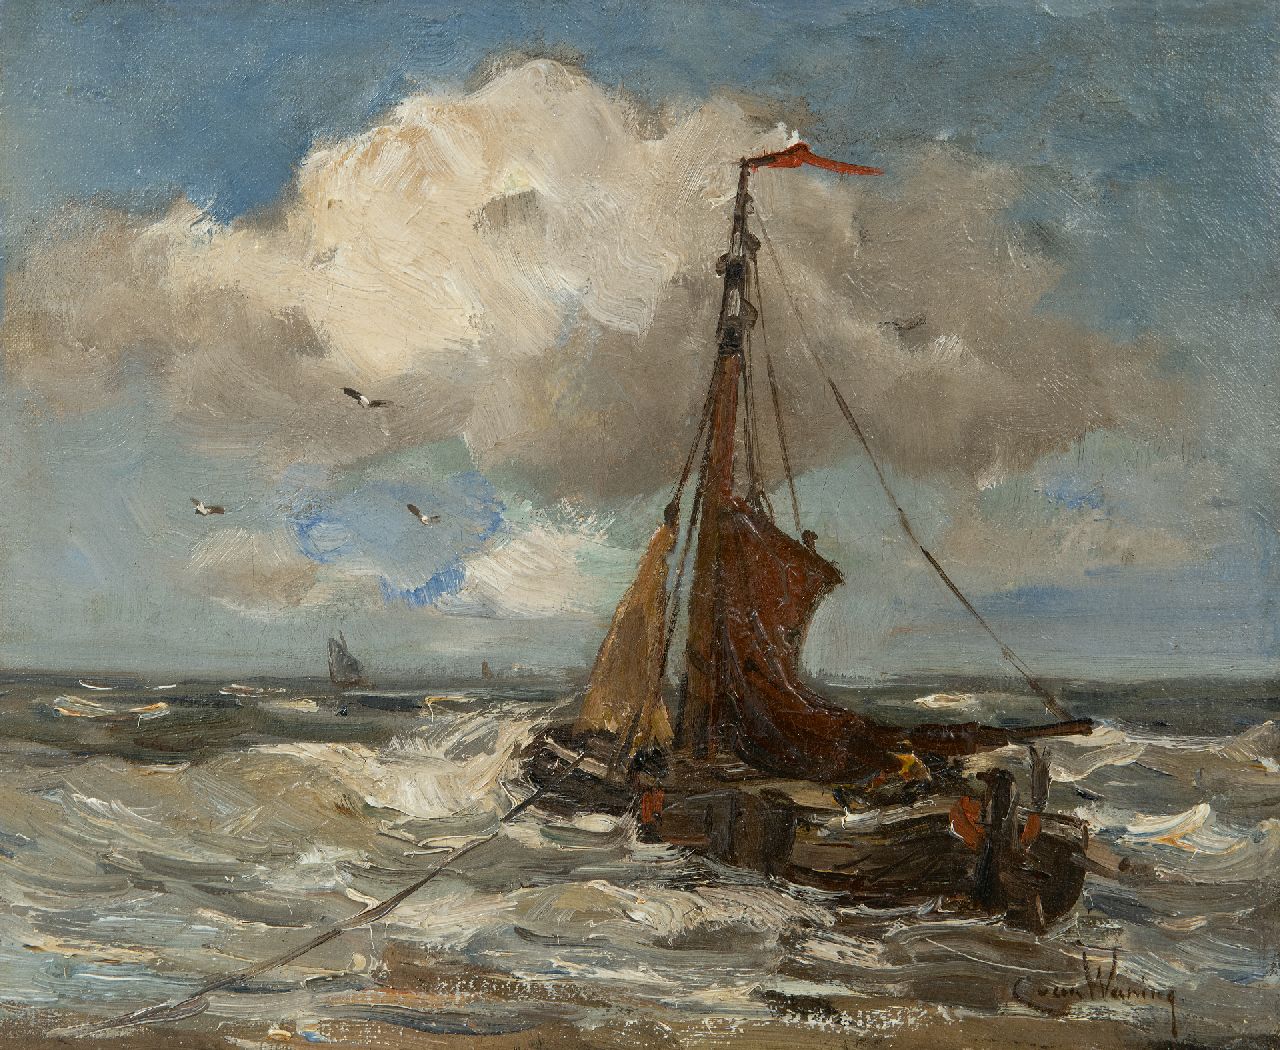 Kees van Waning | Fishing barge moored in the surf, oil on canvas, 25.2 x 31.0 cm, signed l.r.